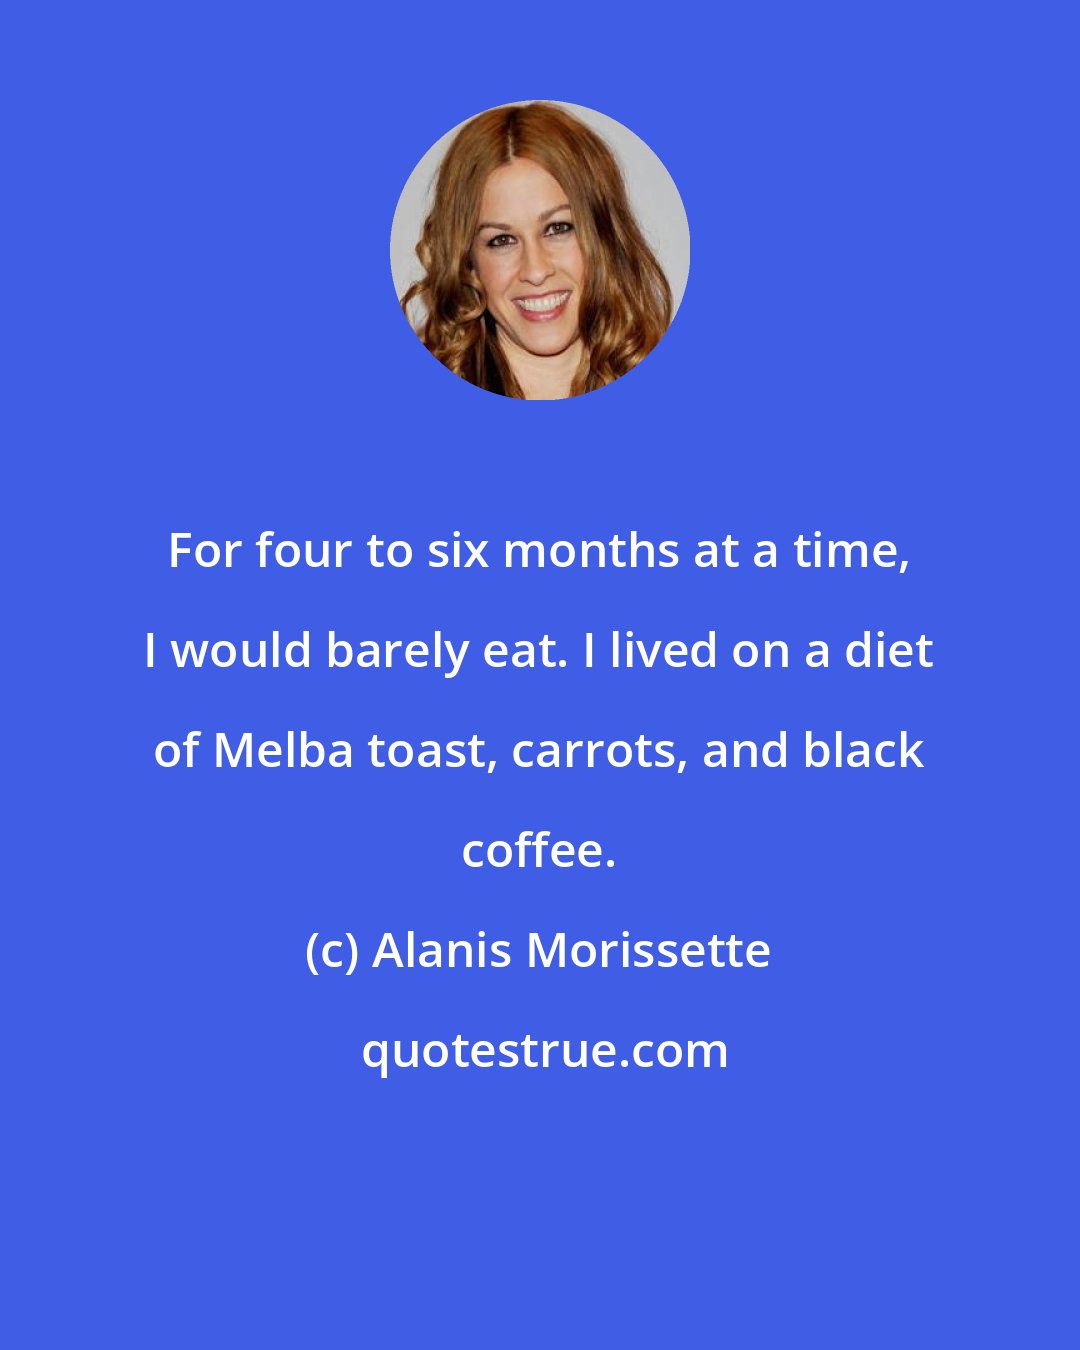 Alanis Morissette: For four to six months at a time, I would barely eat. I lived on a diet of Melba toast, carrots, and black coffee.